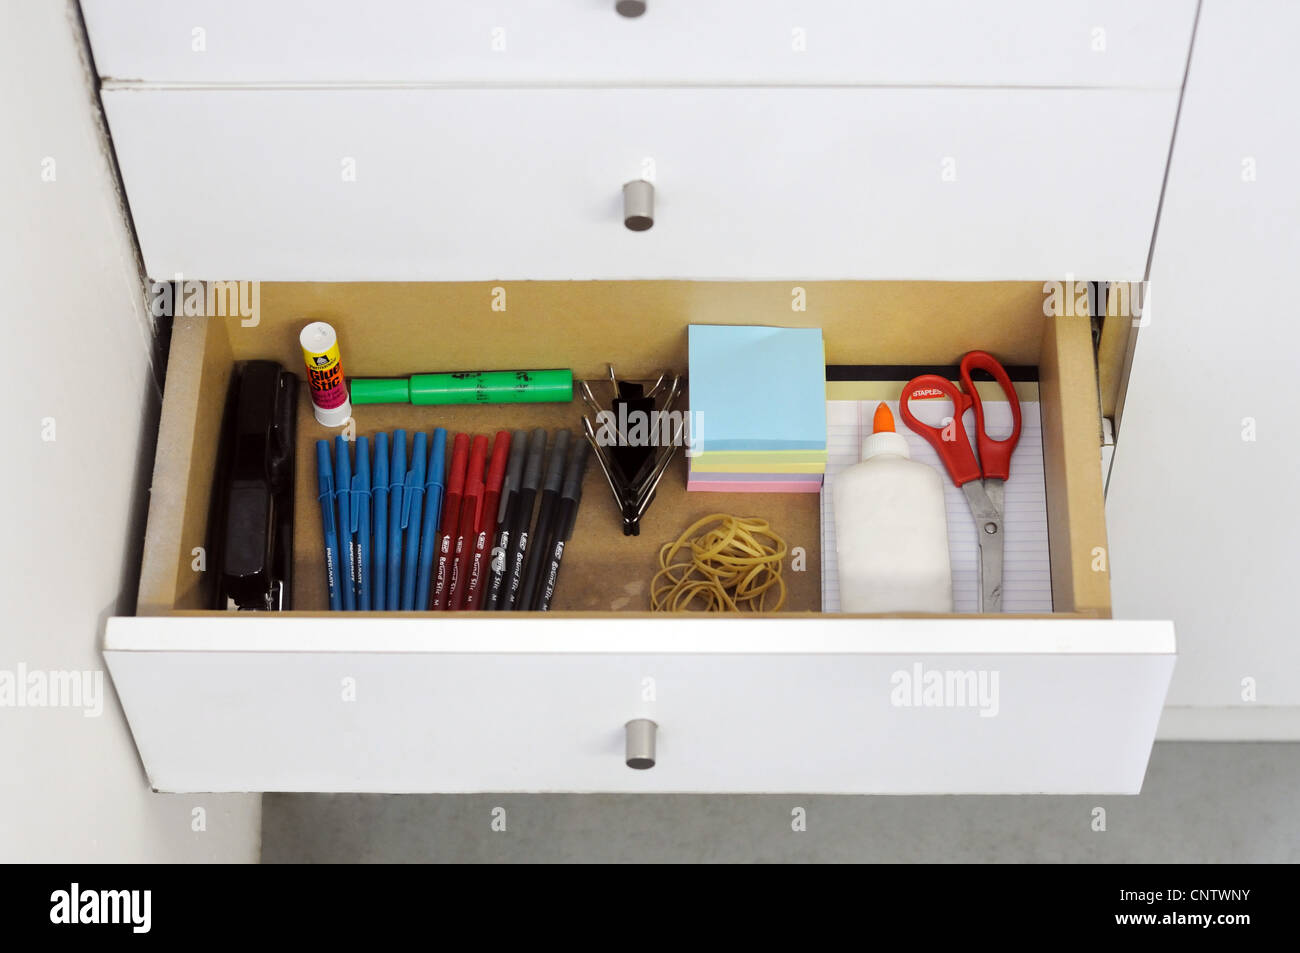 A before and after view of a clean and messy drawer. Stock Photo